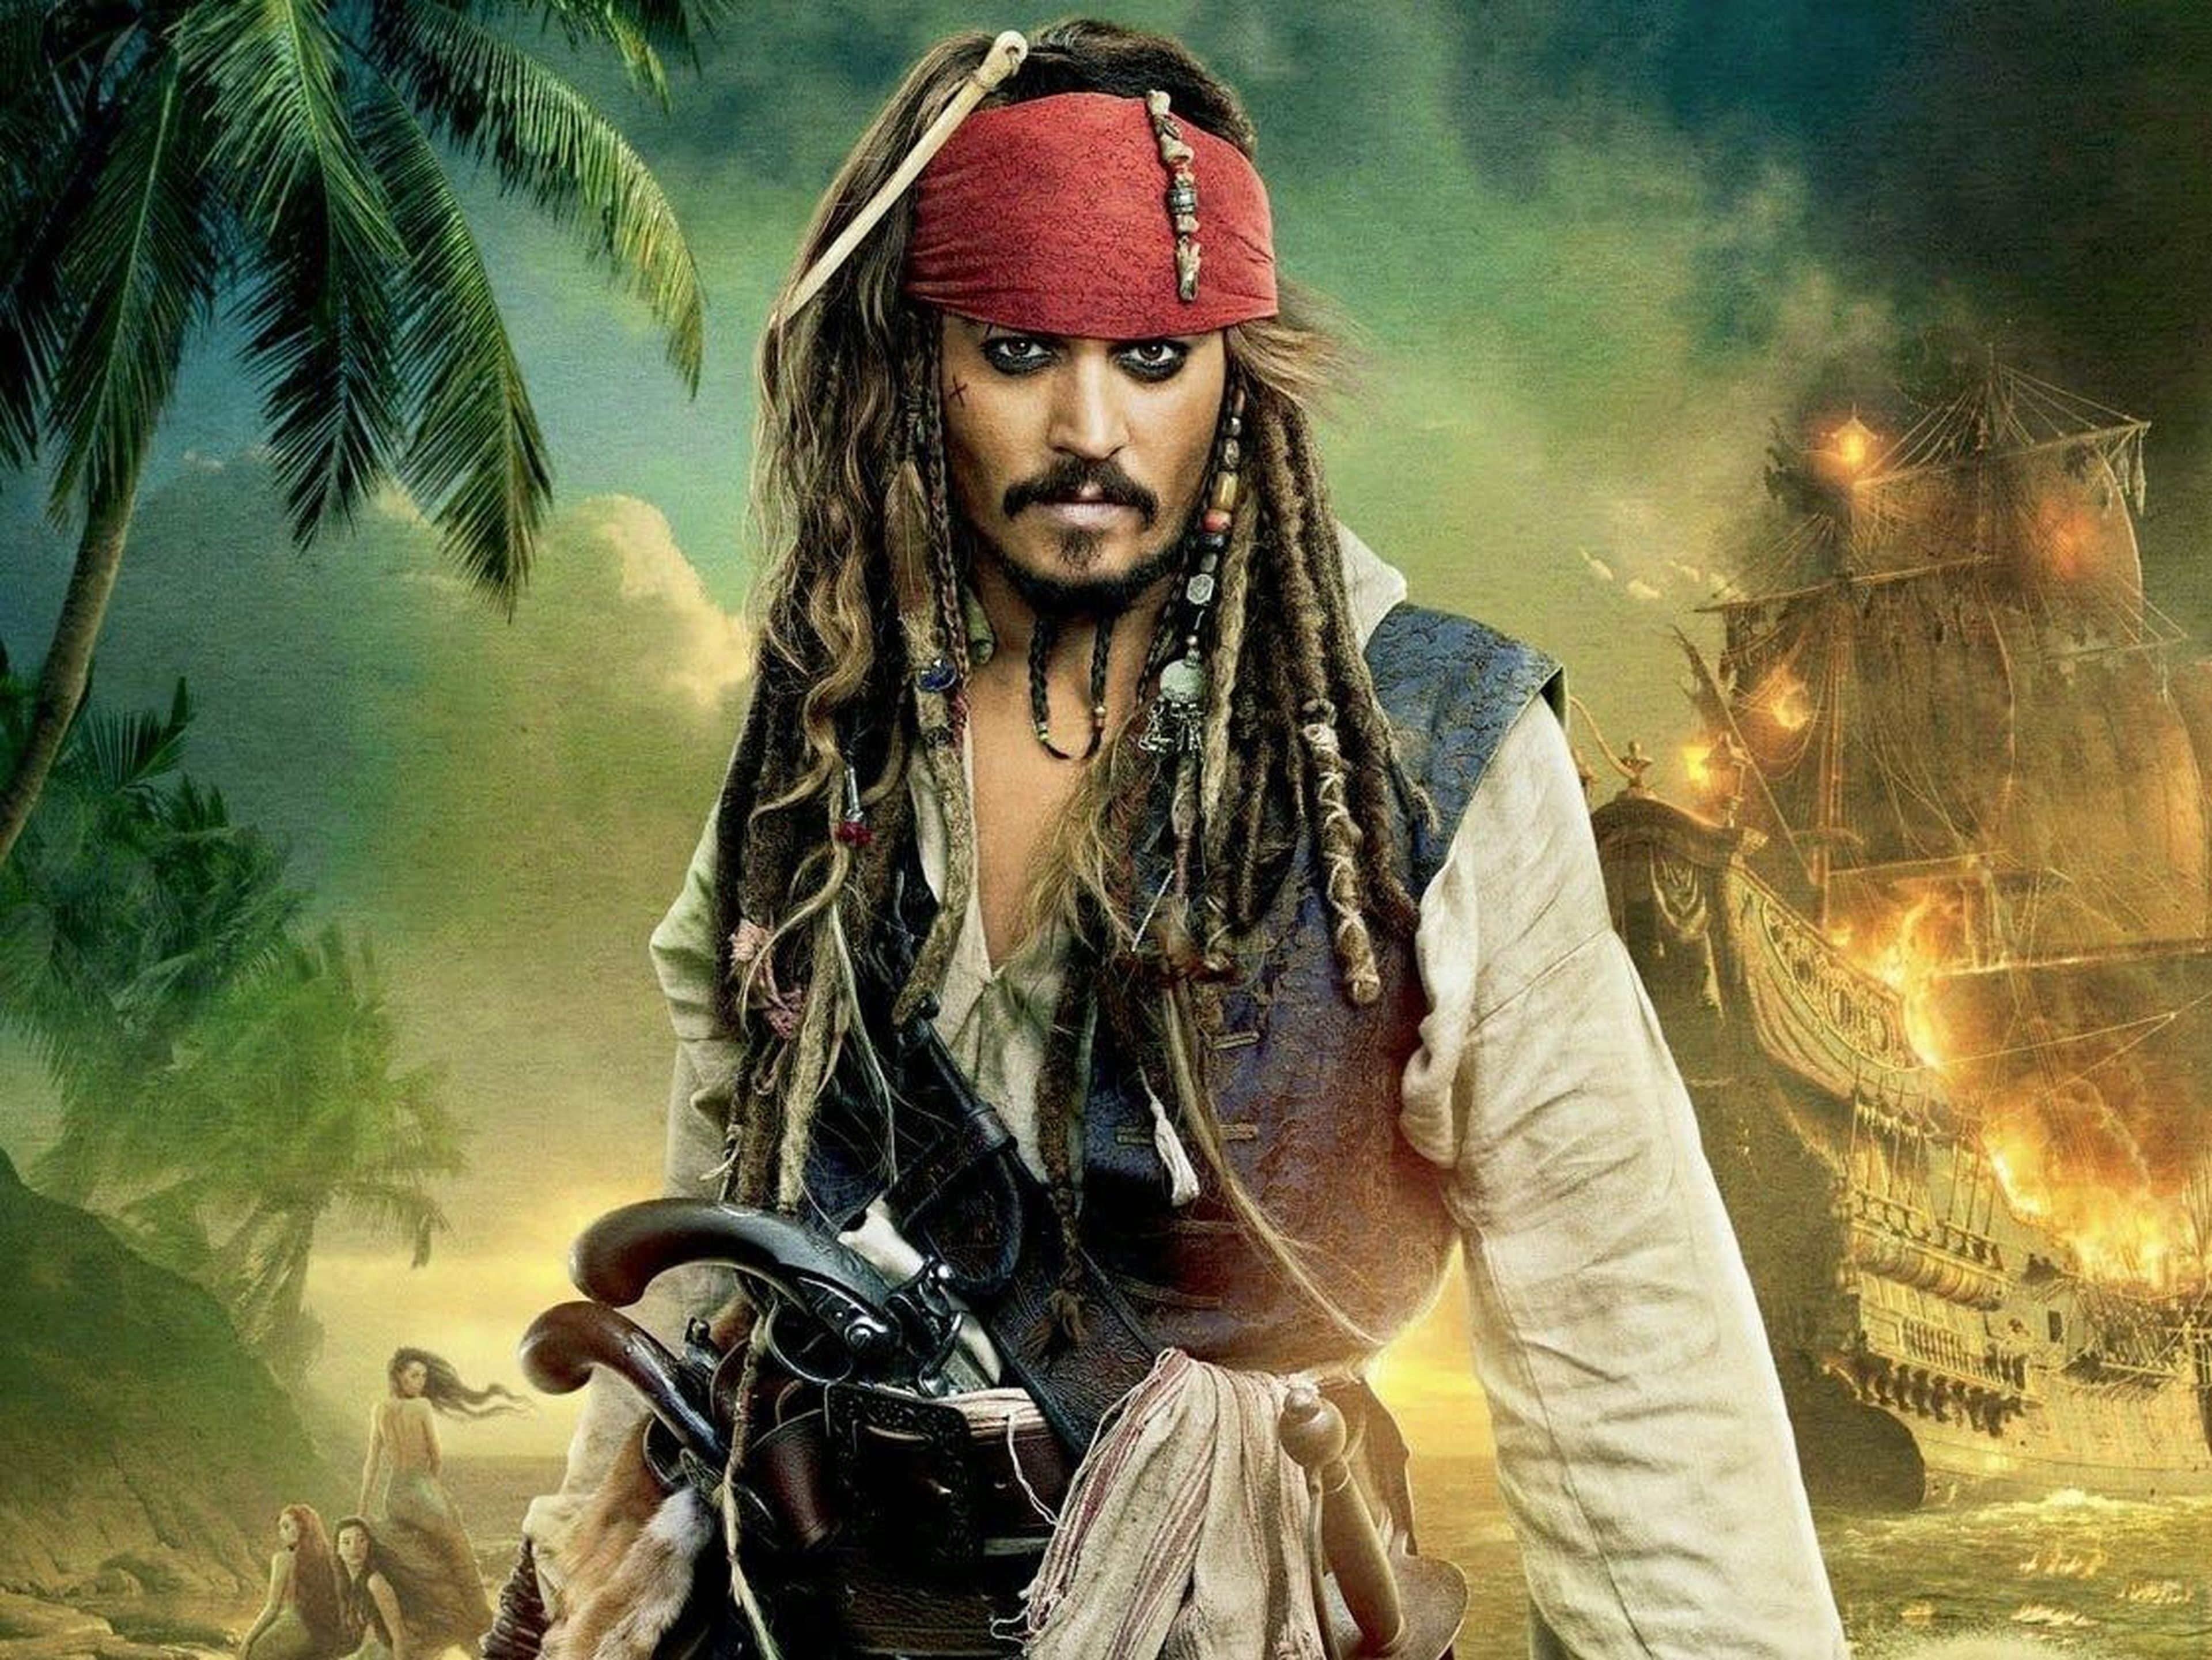 10. Johnny Depp as Jack Sparrow in "Pirates of the Caribbean: On Stranger Tides"